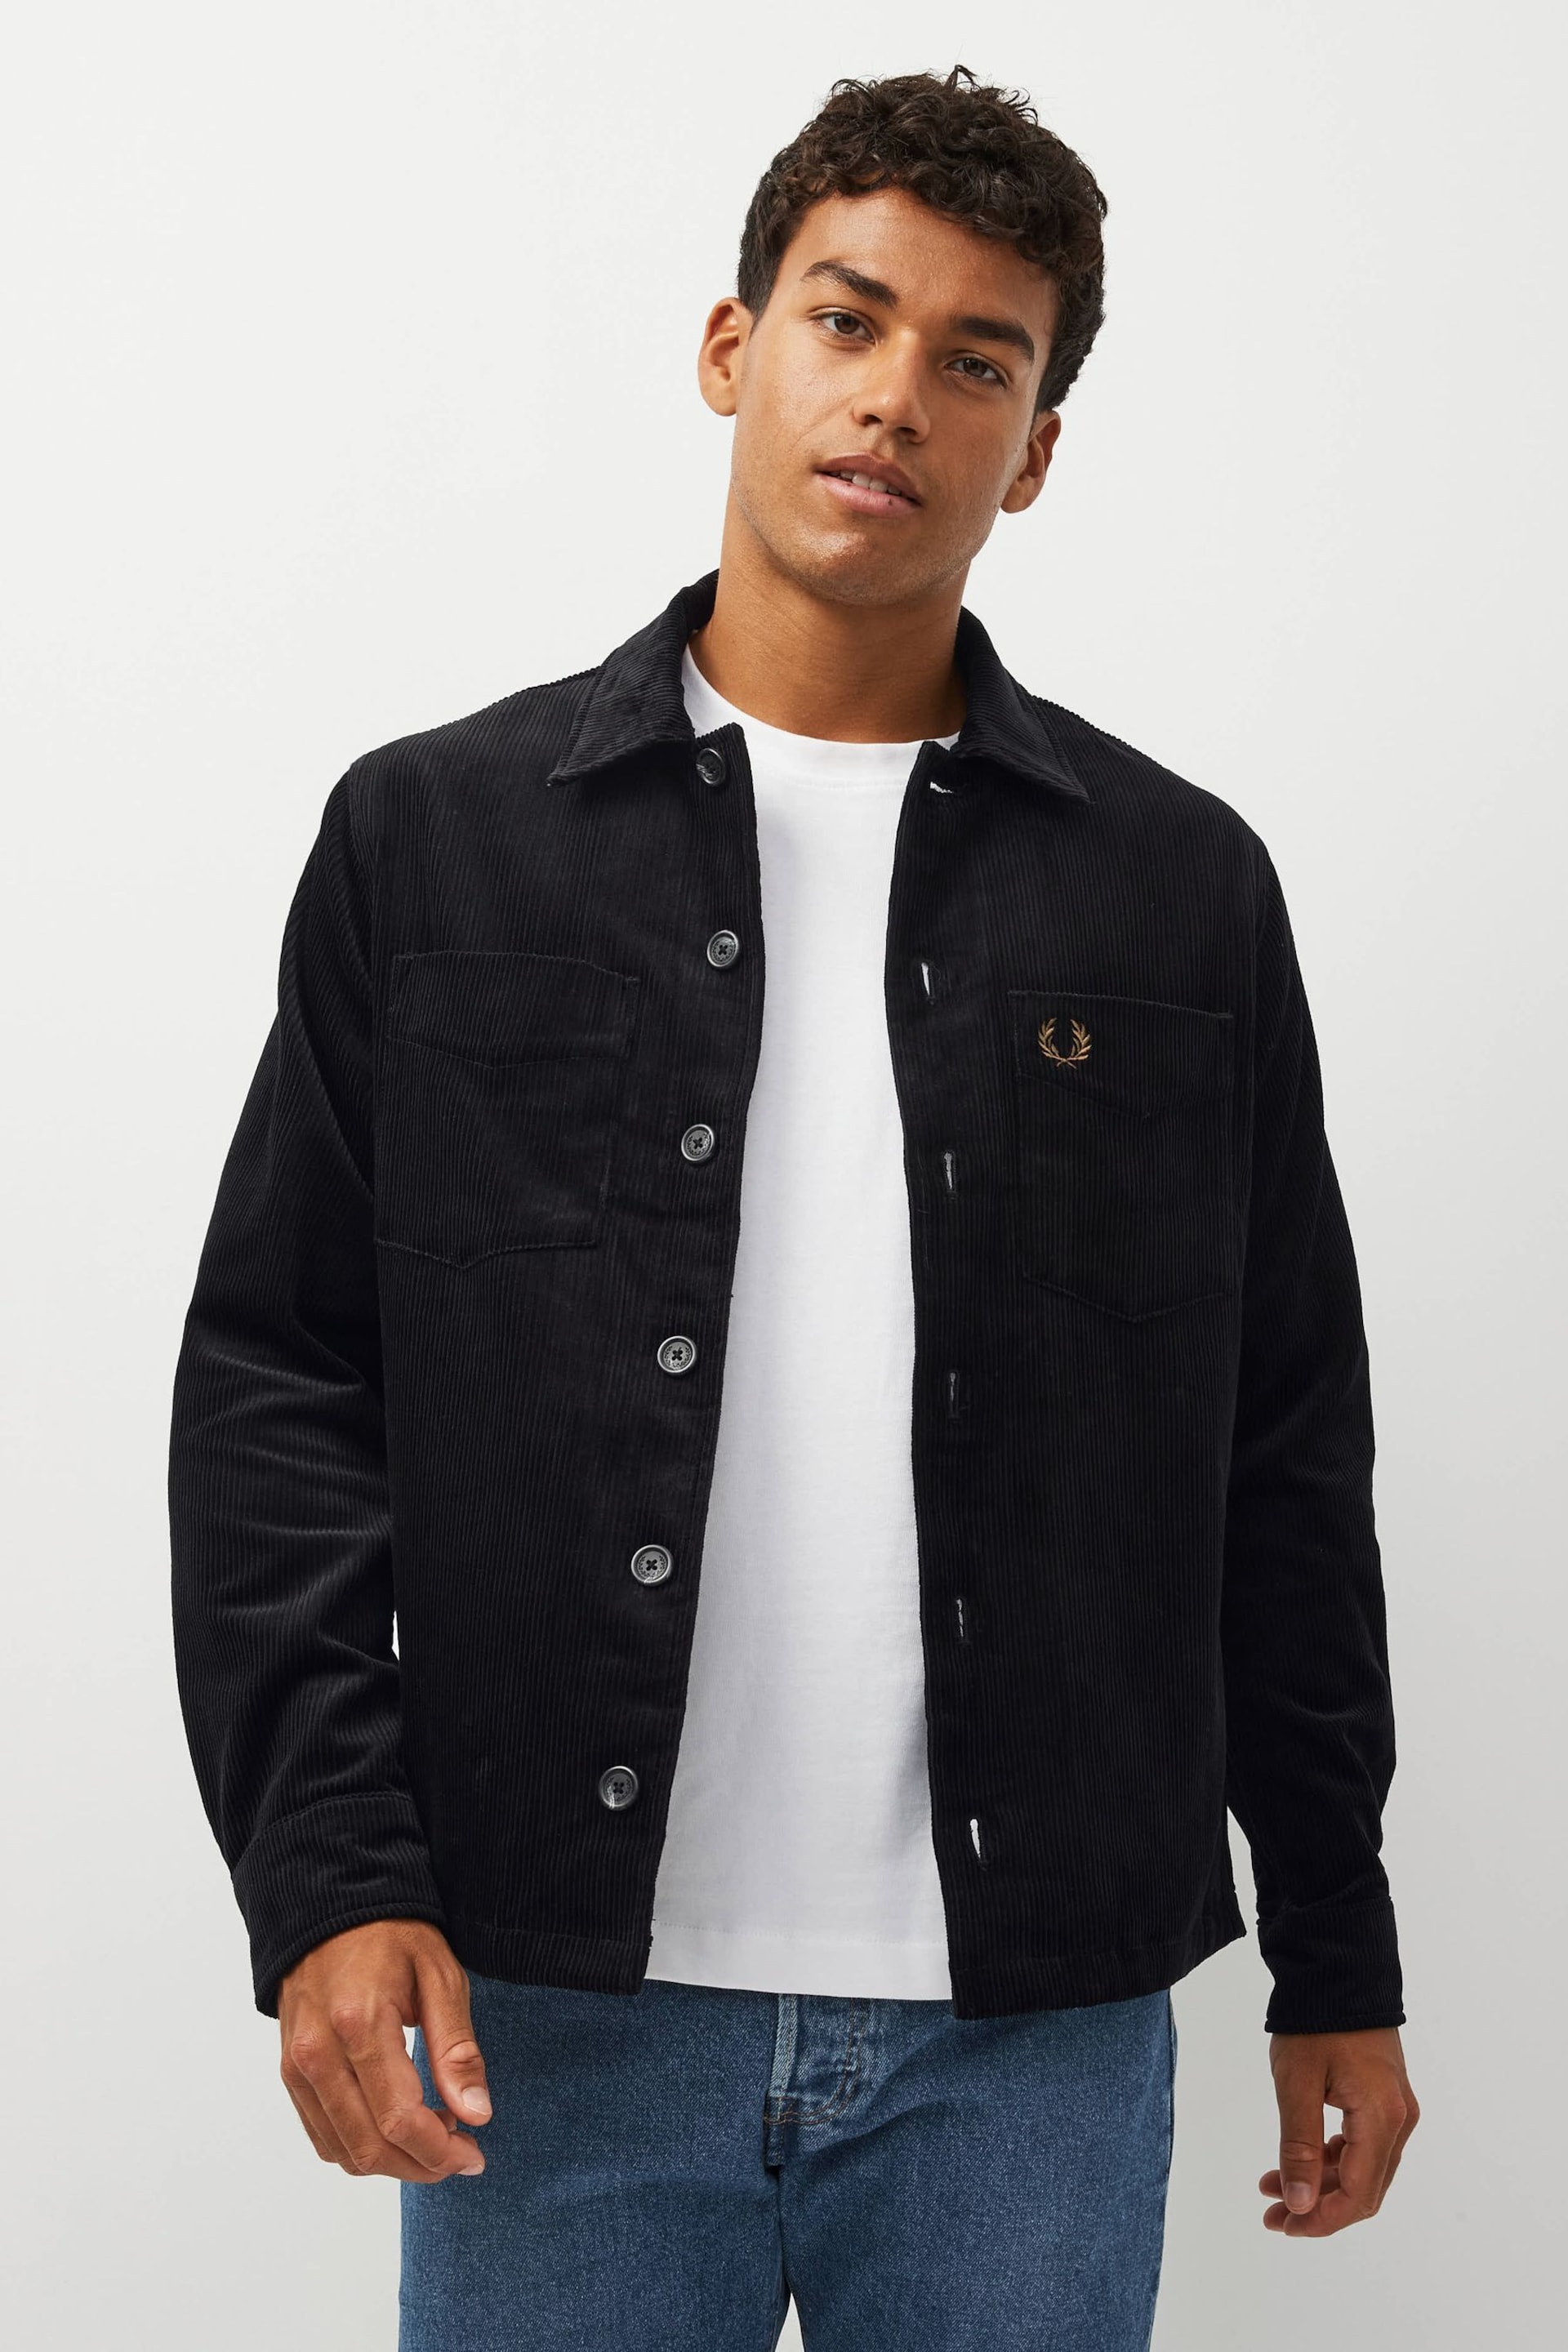 Fred Perry Cord Black Overshirt - Image 1 of 4